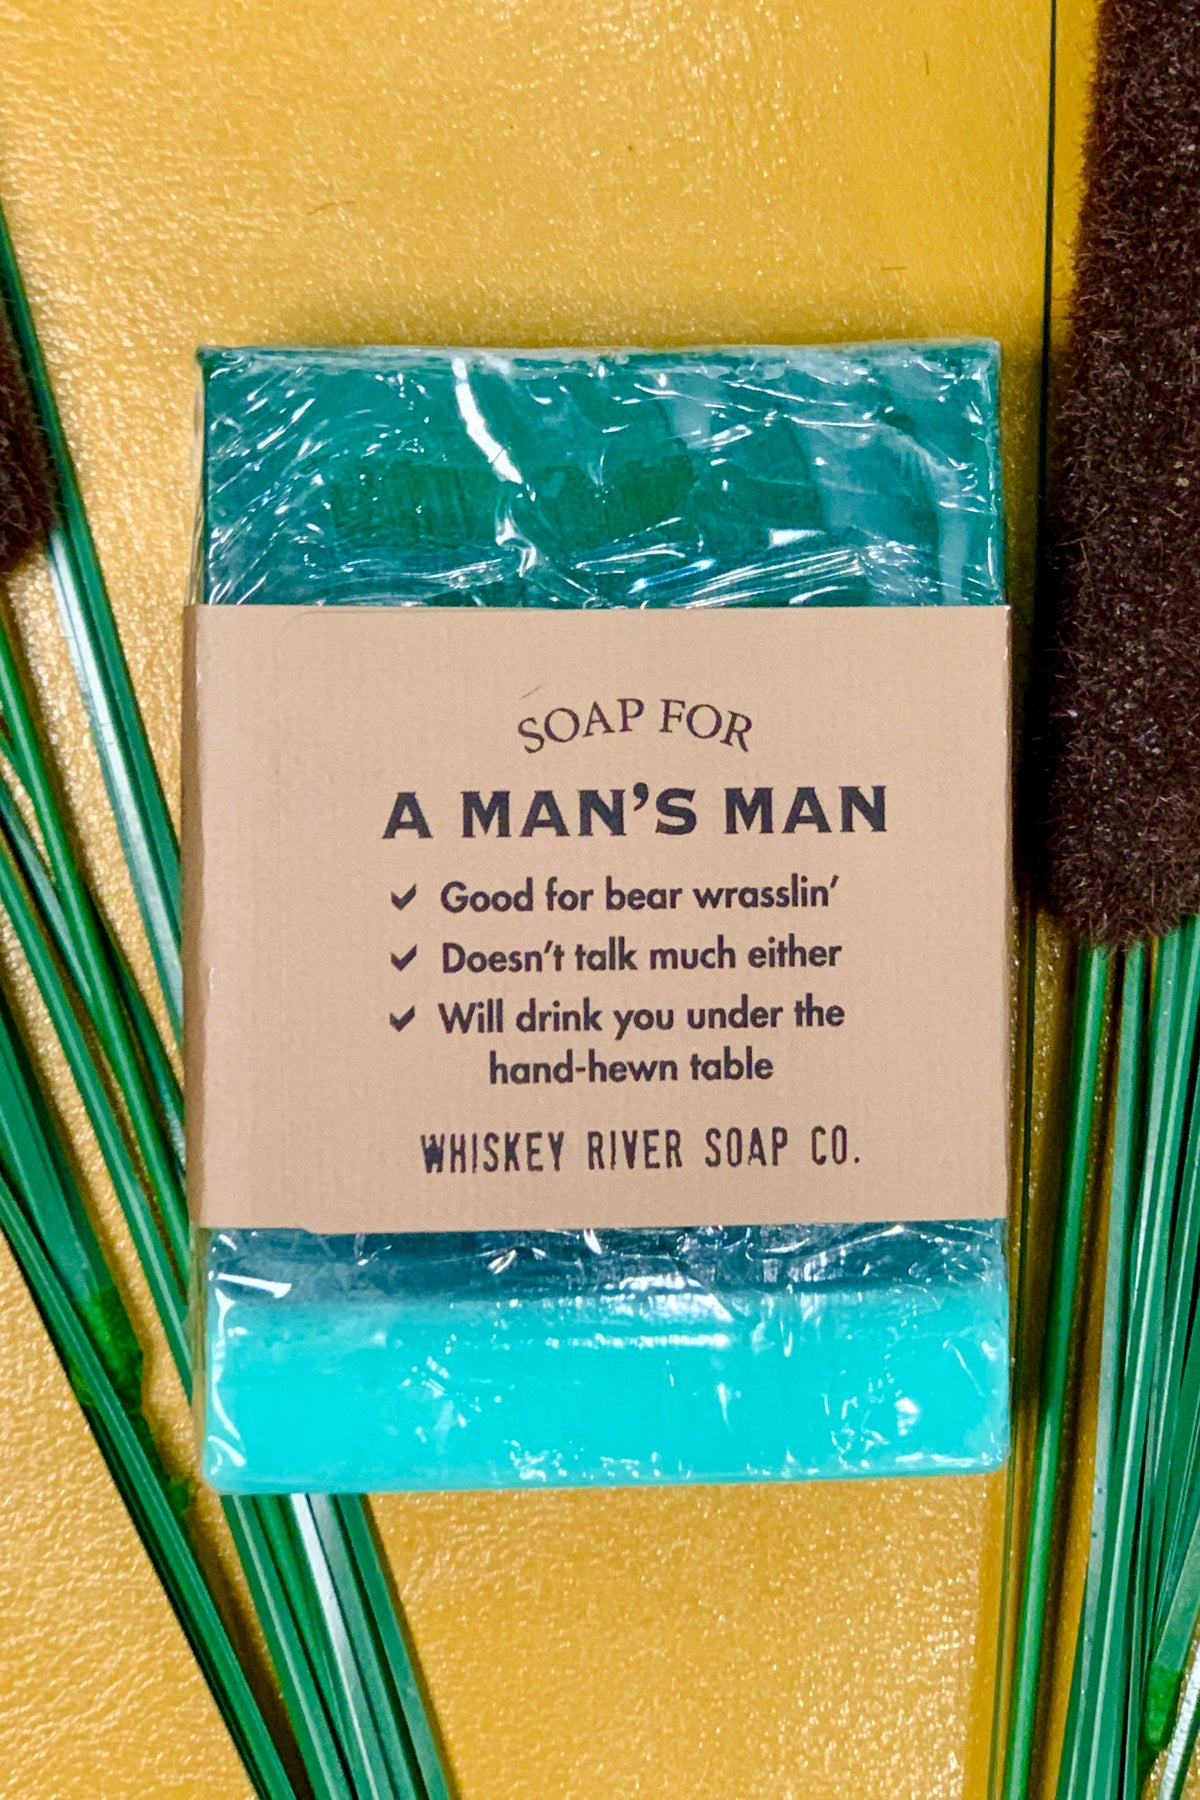 Soap for A Man's Man